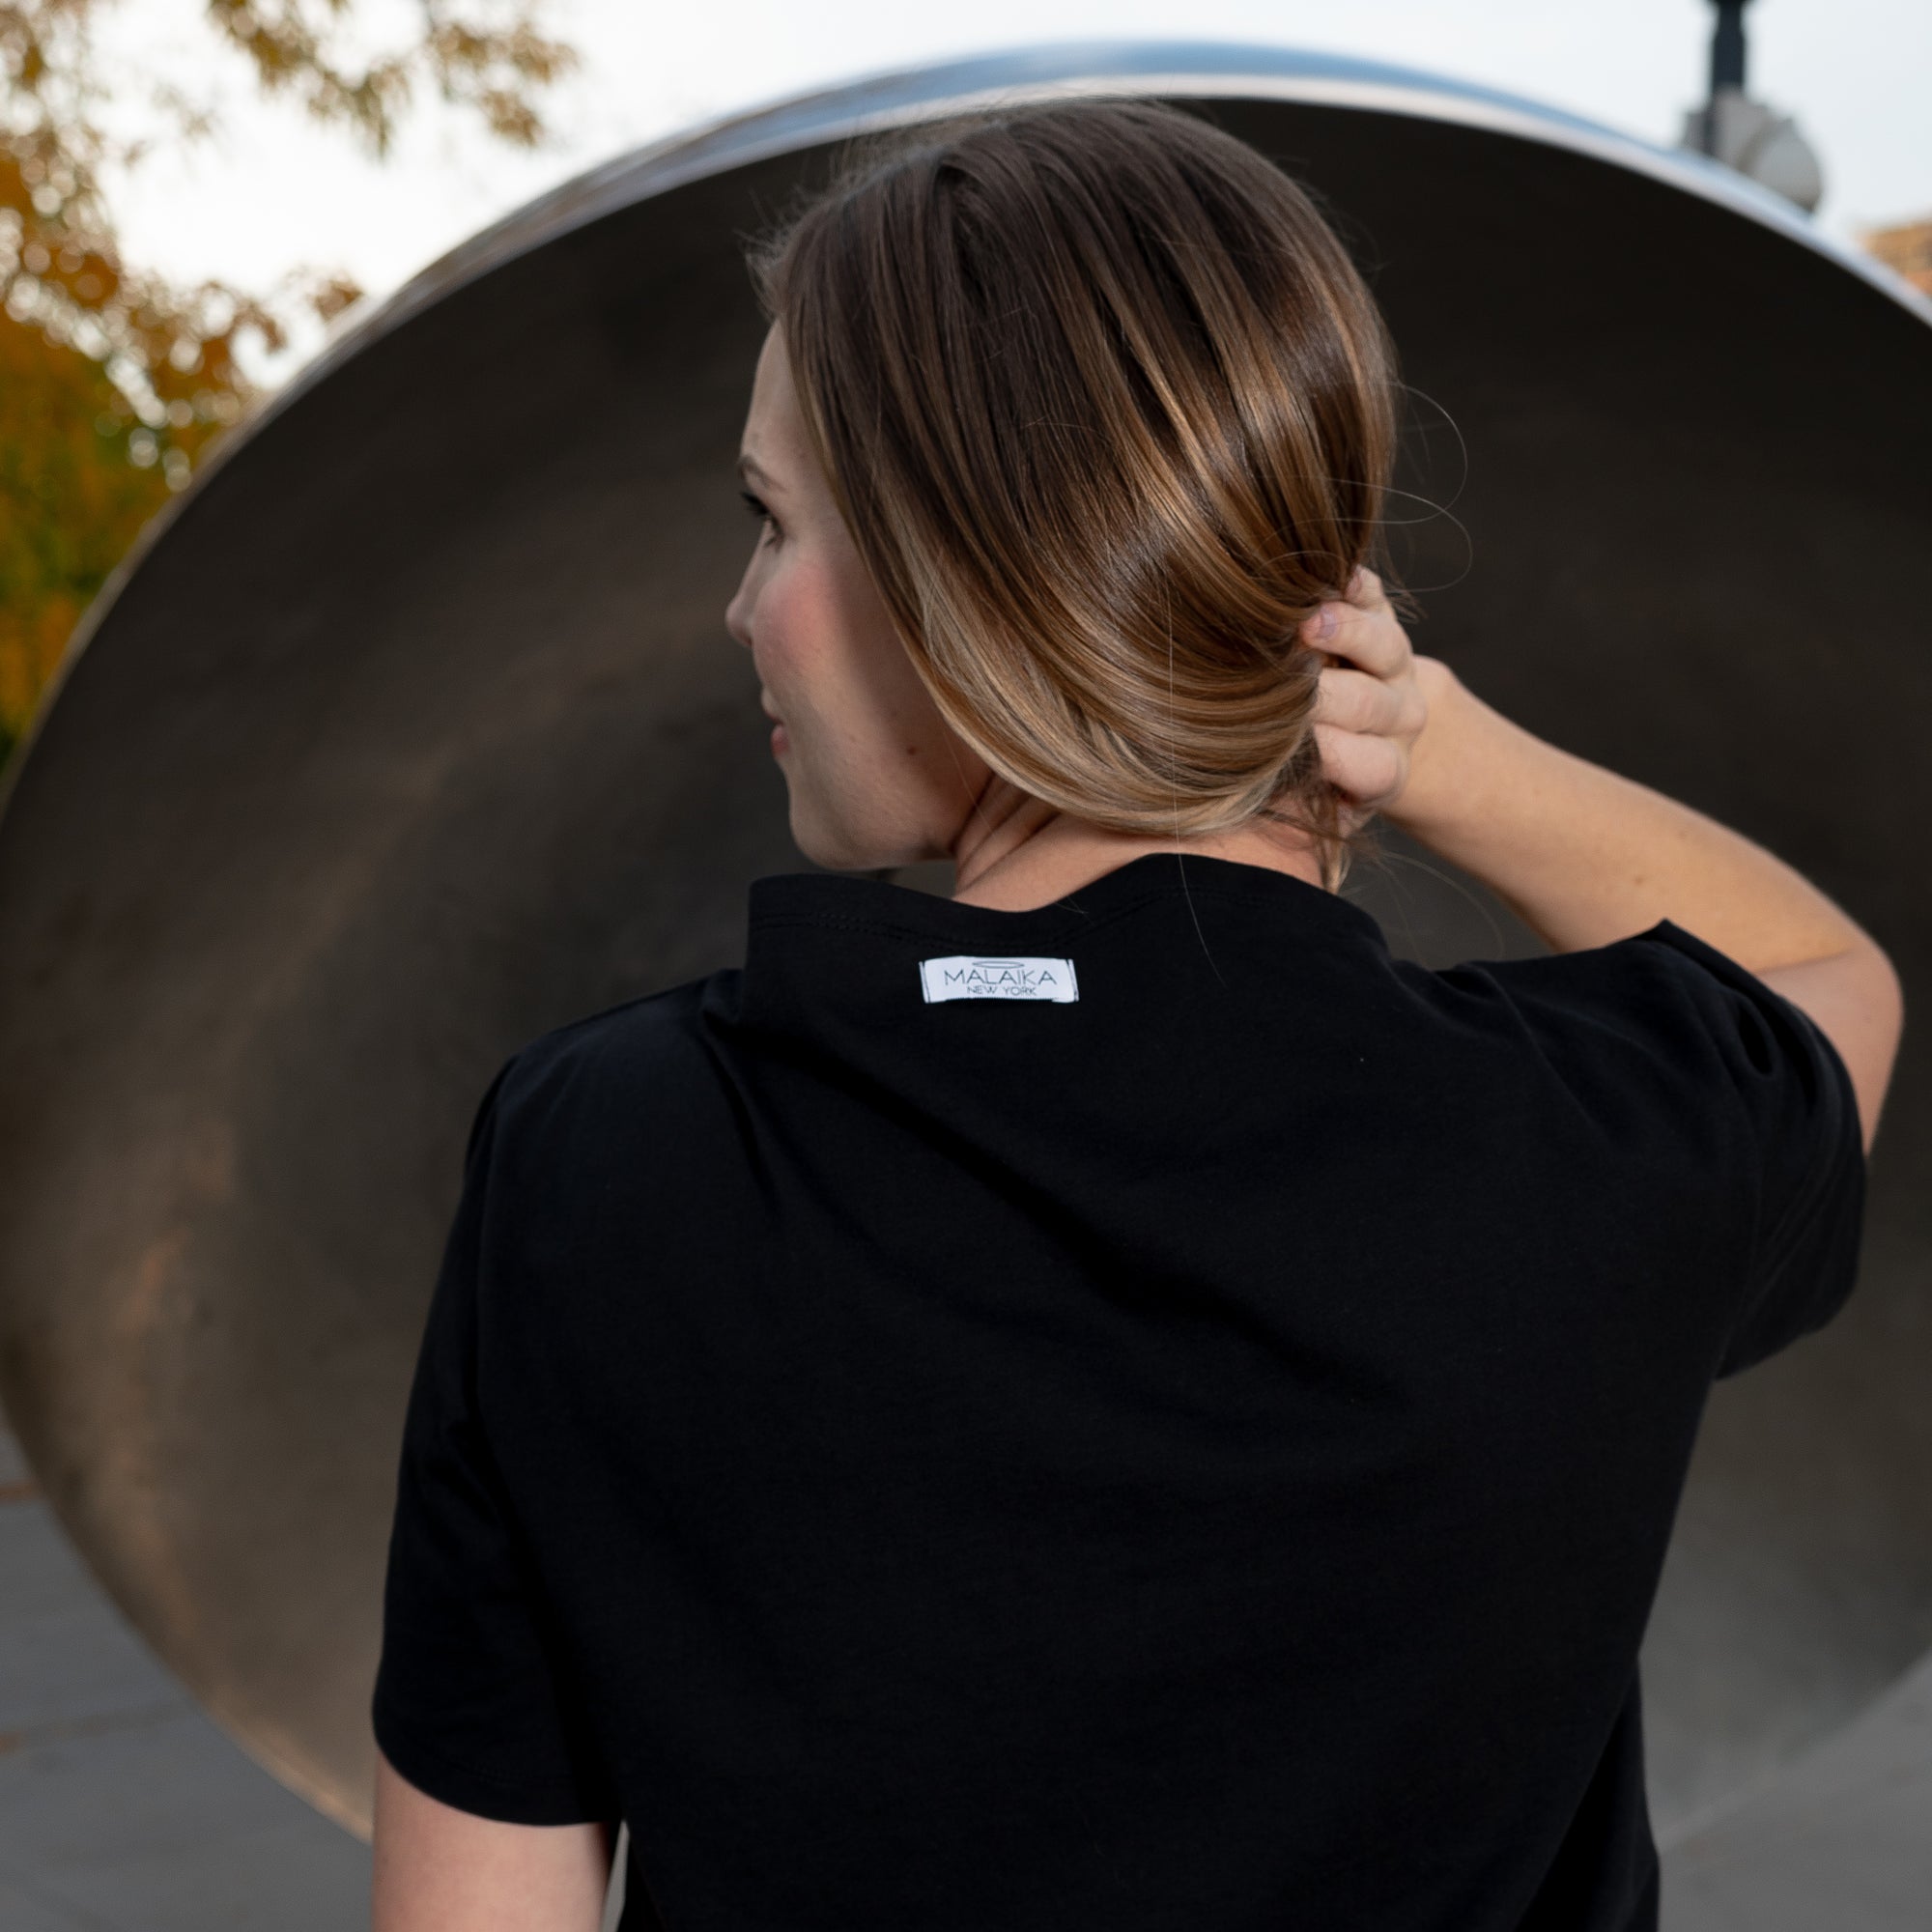 A woman with her back turned to show the label on her black boat neck t-shirt by Malaika New York